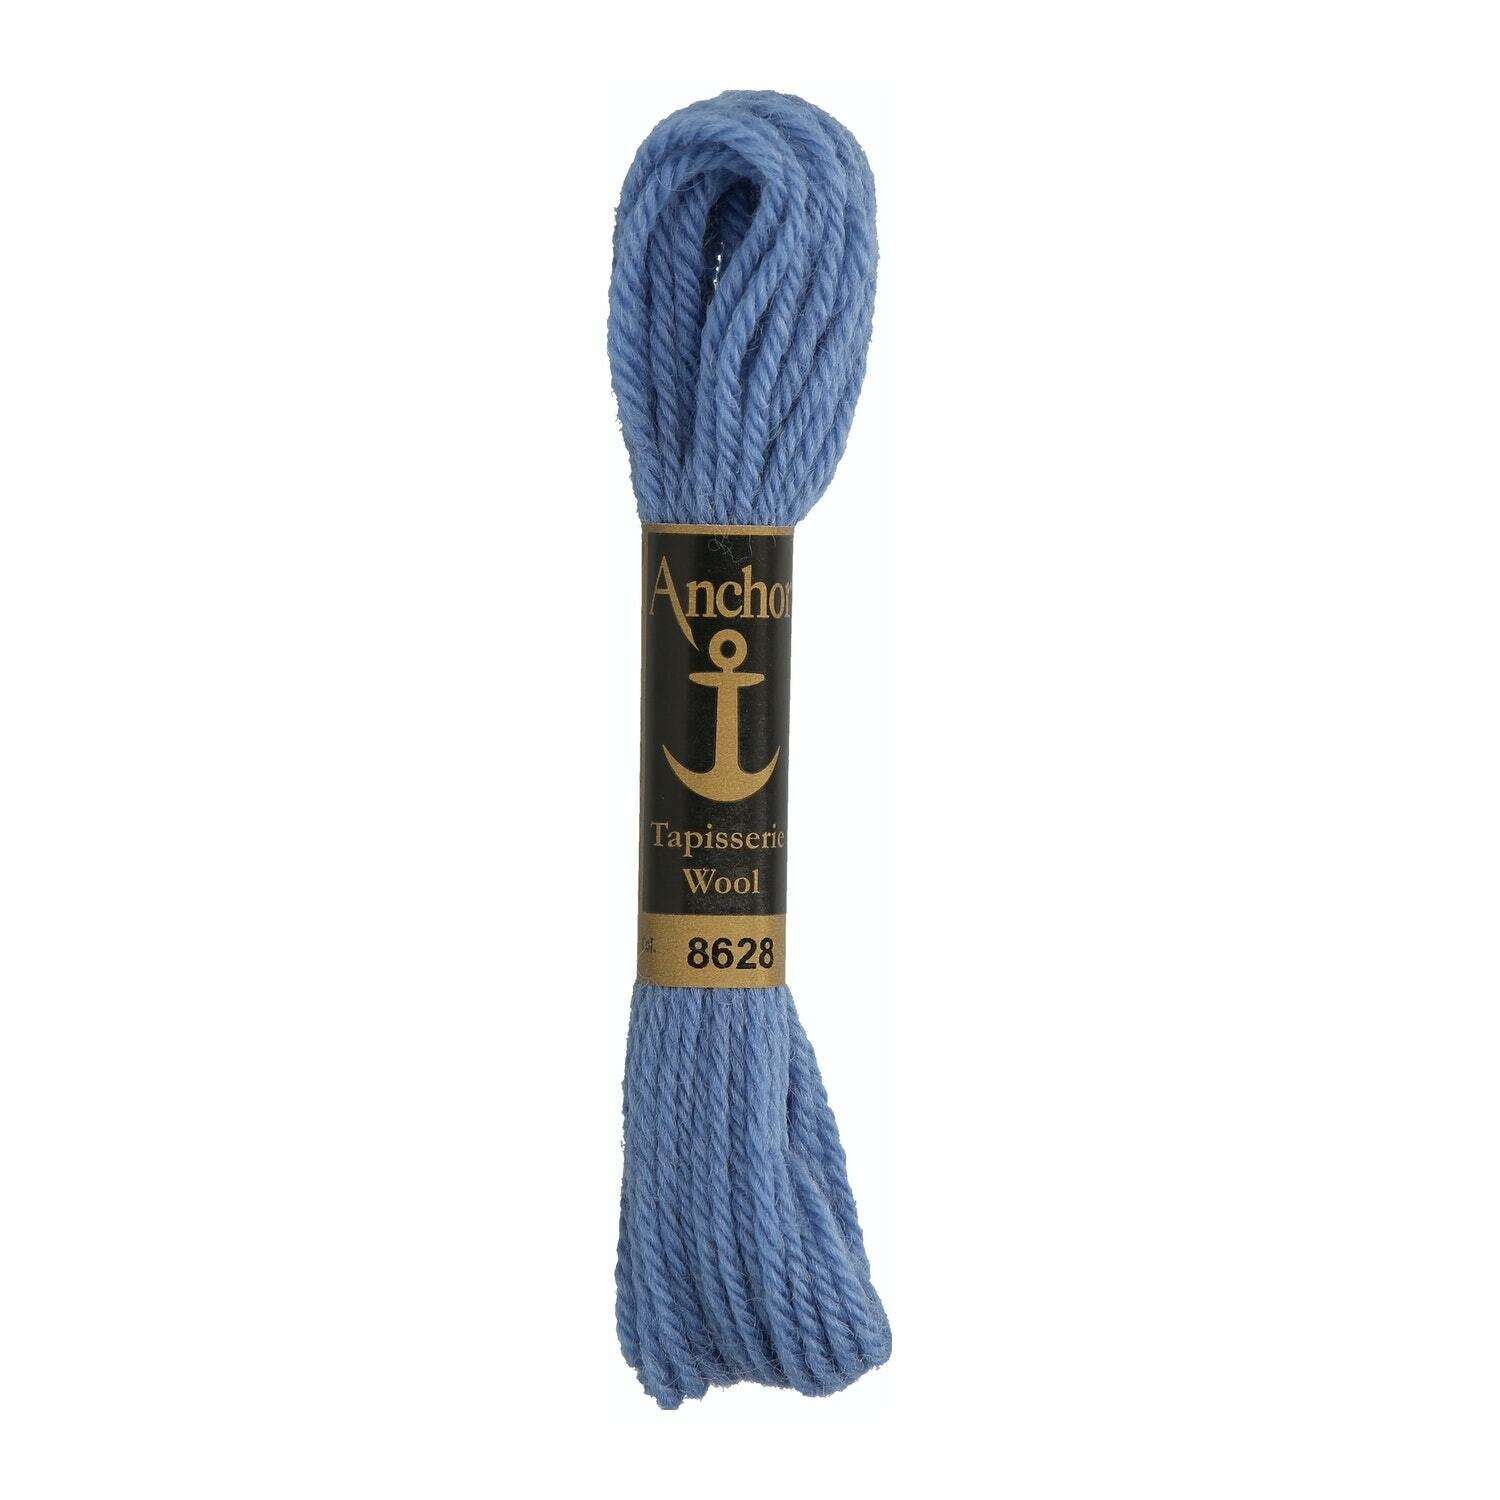 Anchor Tapisserie Wool #  08628